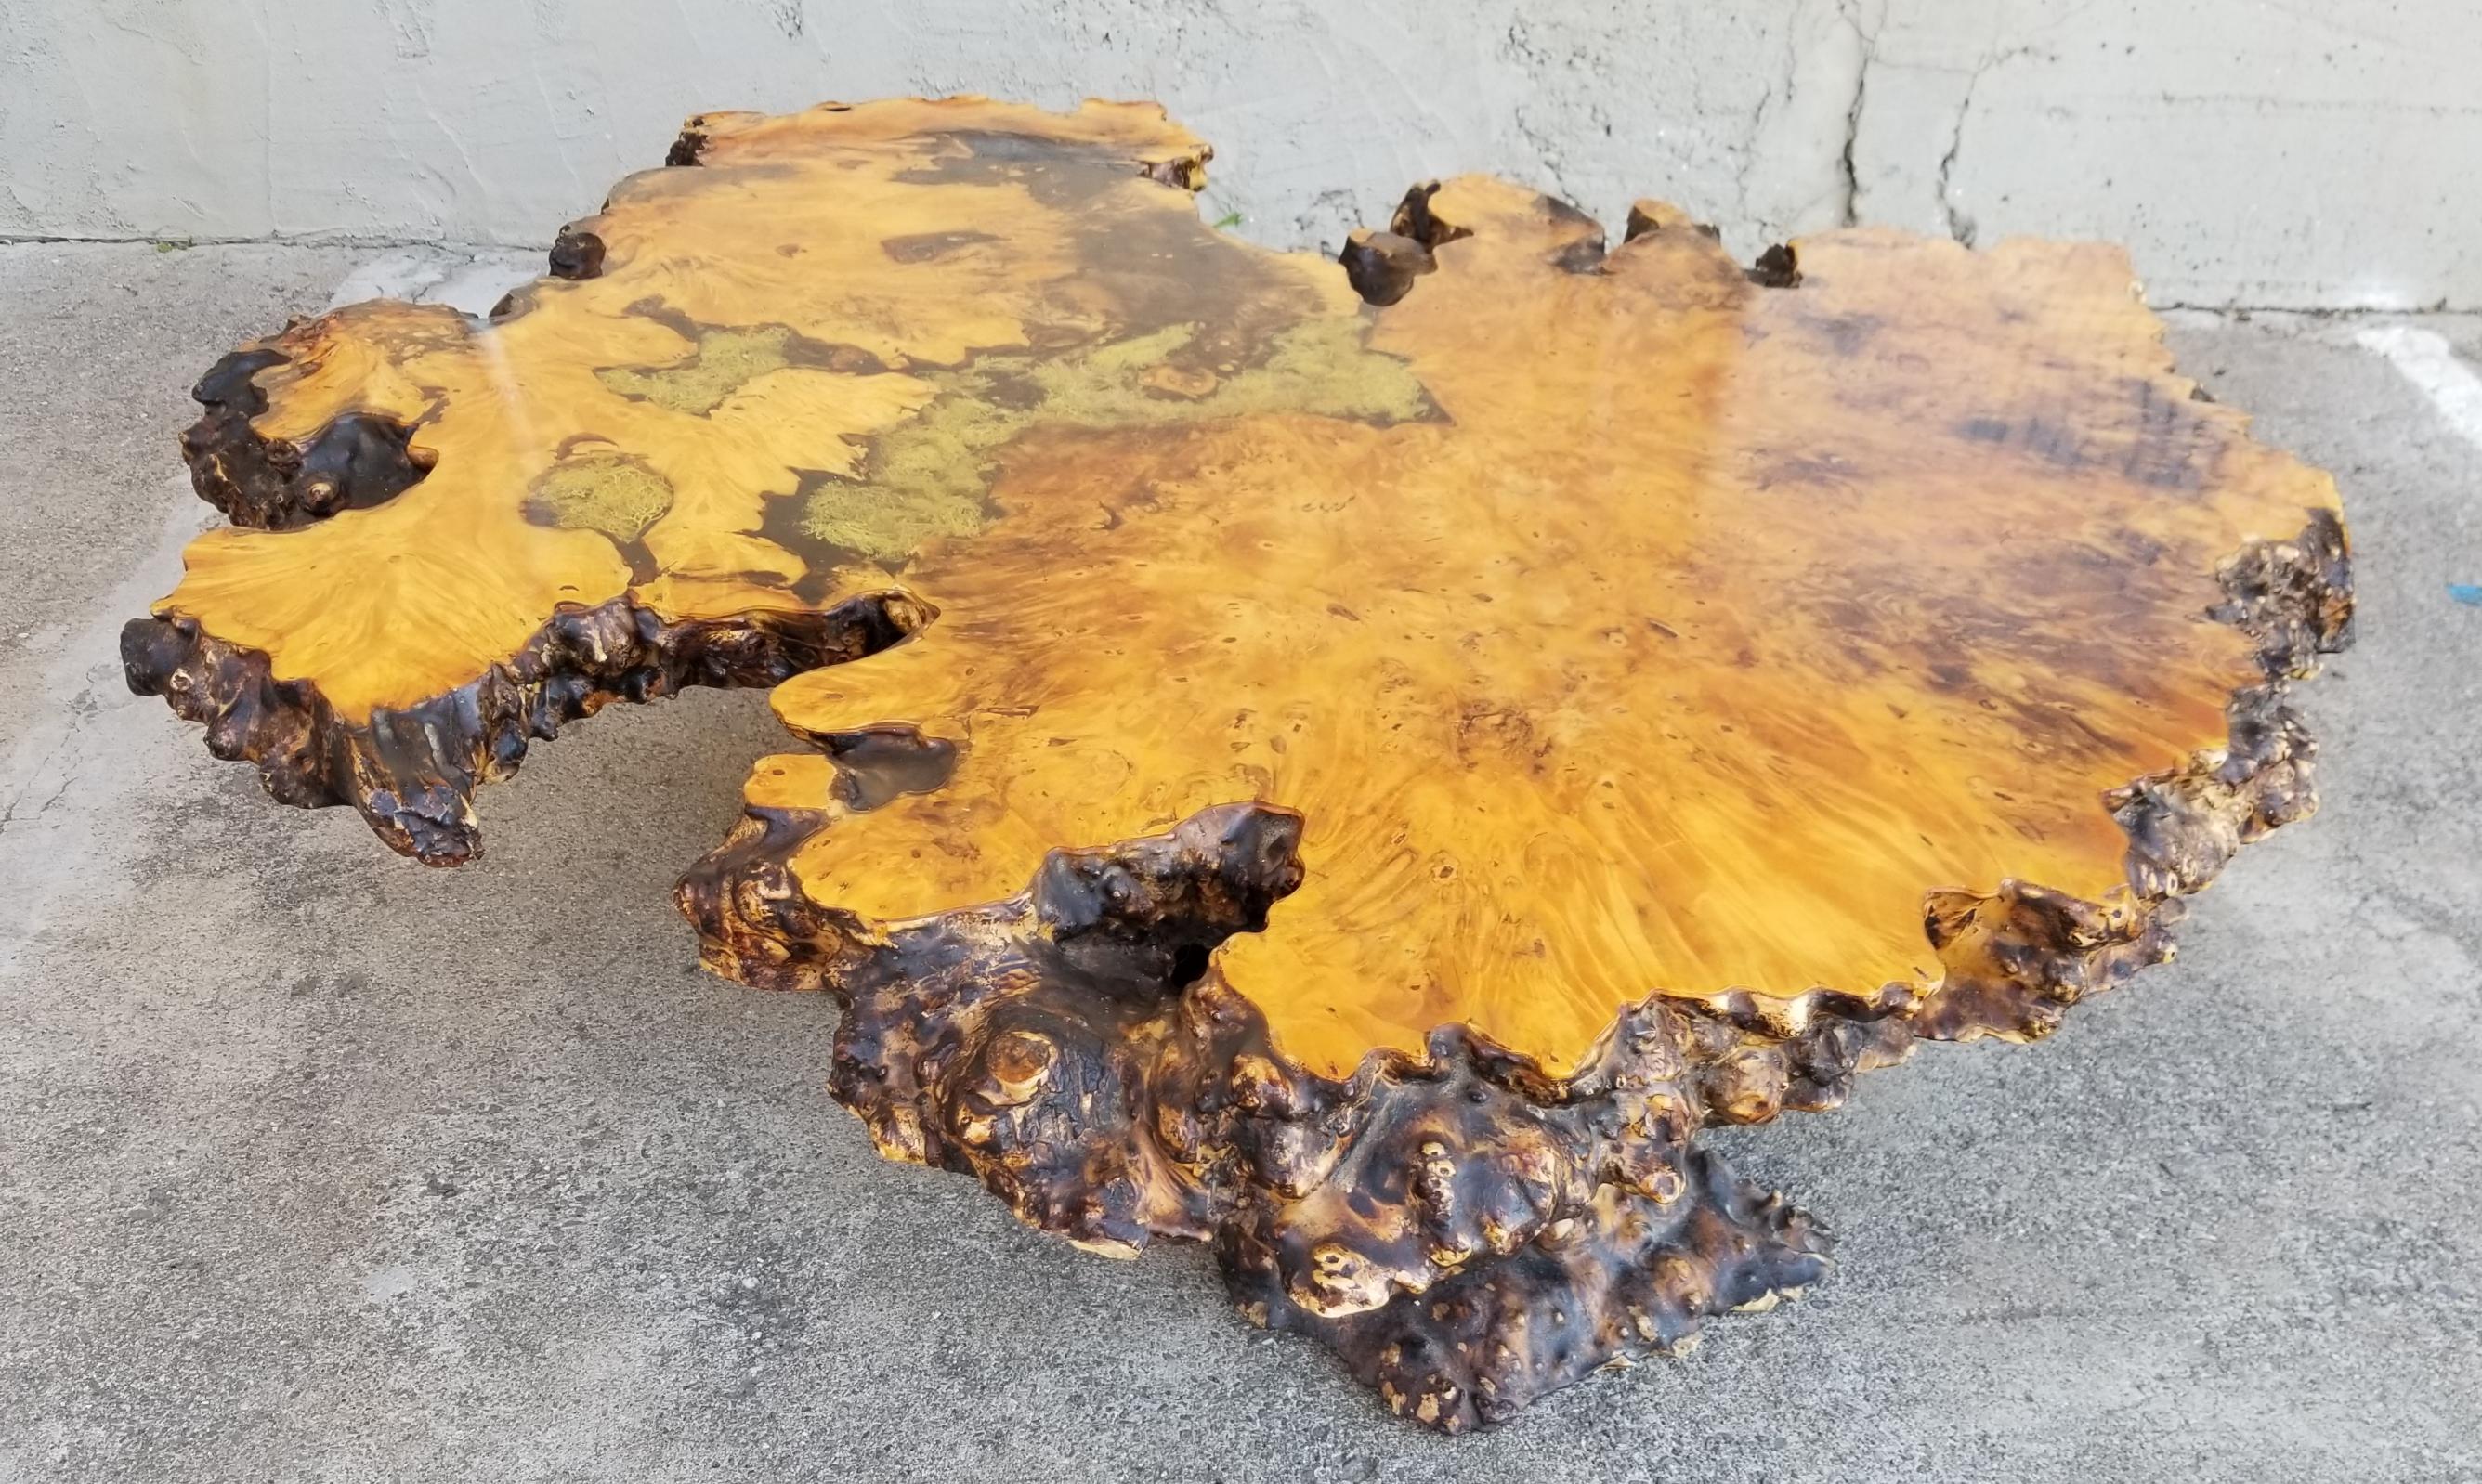 Exceptional example of a live edge burl-wood coffee table. Natural tree stump base with authentic moss detail under finish of top surface. Stunning slab of exotic burl wood used for table top, appears to be Birdseye maple. Highly detailed organic